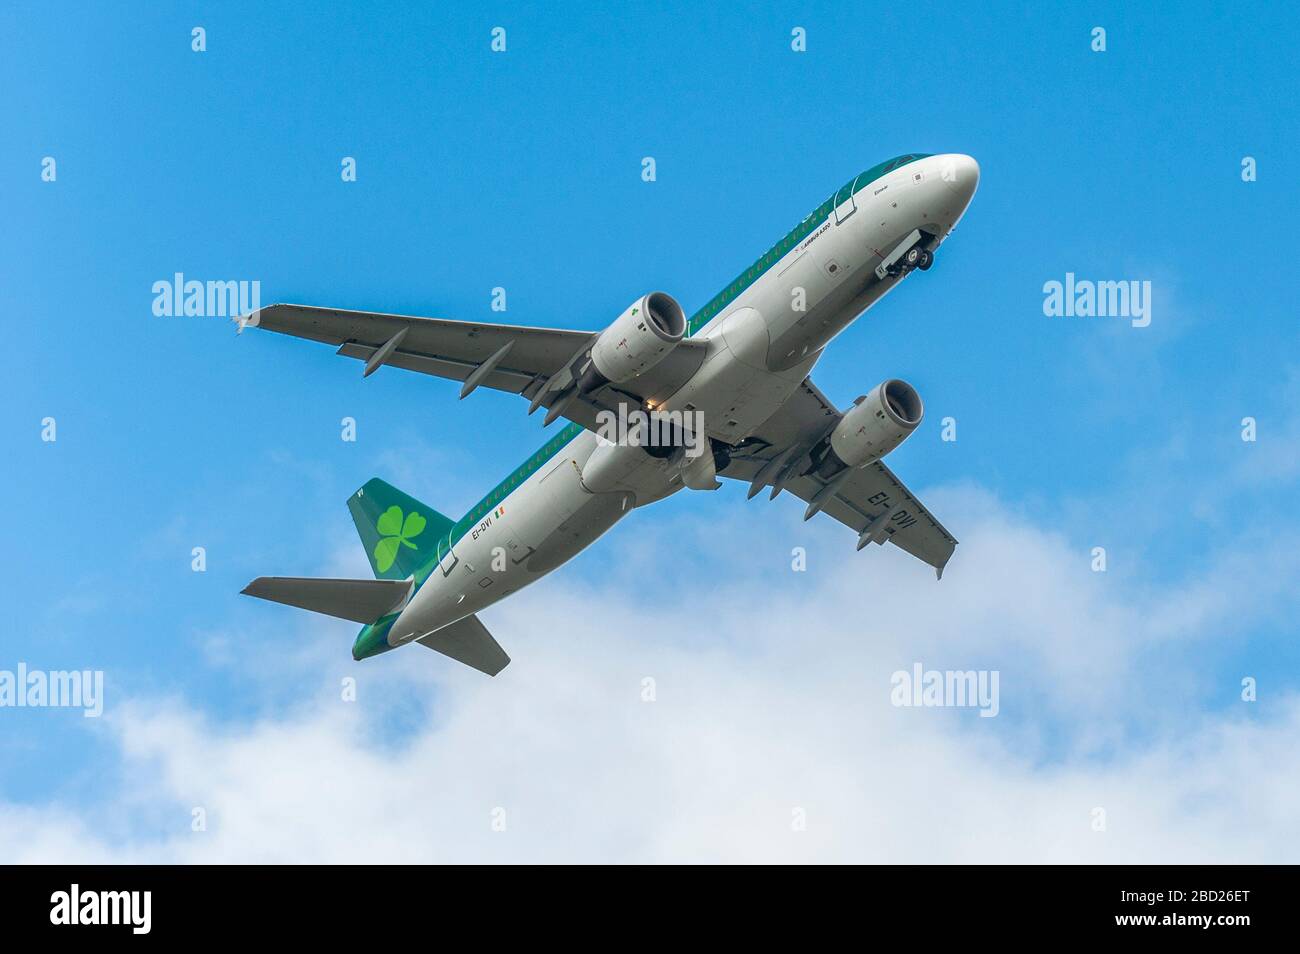 Cork, Ireland. 6th Apr, 2020. Aer Lingus Airbus A320, flight no. EI722, takes off from Cork Airport bound for London Heathrow. This is one of only a handful of departures from Cork during the Covid-19 pandemic. Credit: Andy Gibson/Alamy Live News Stock Photo